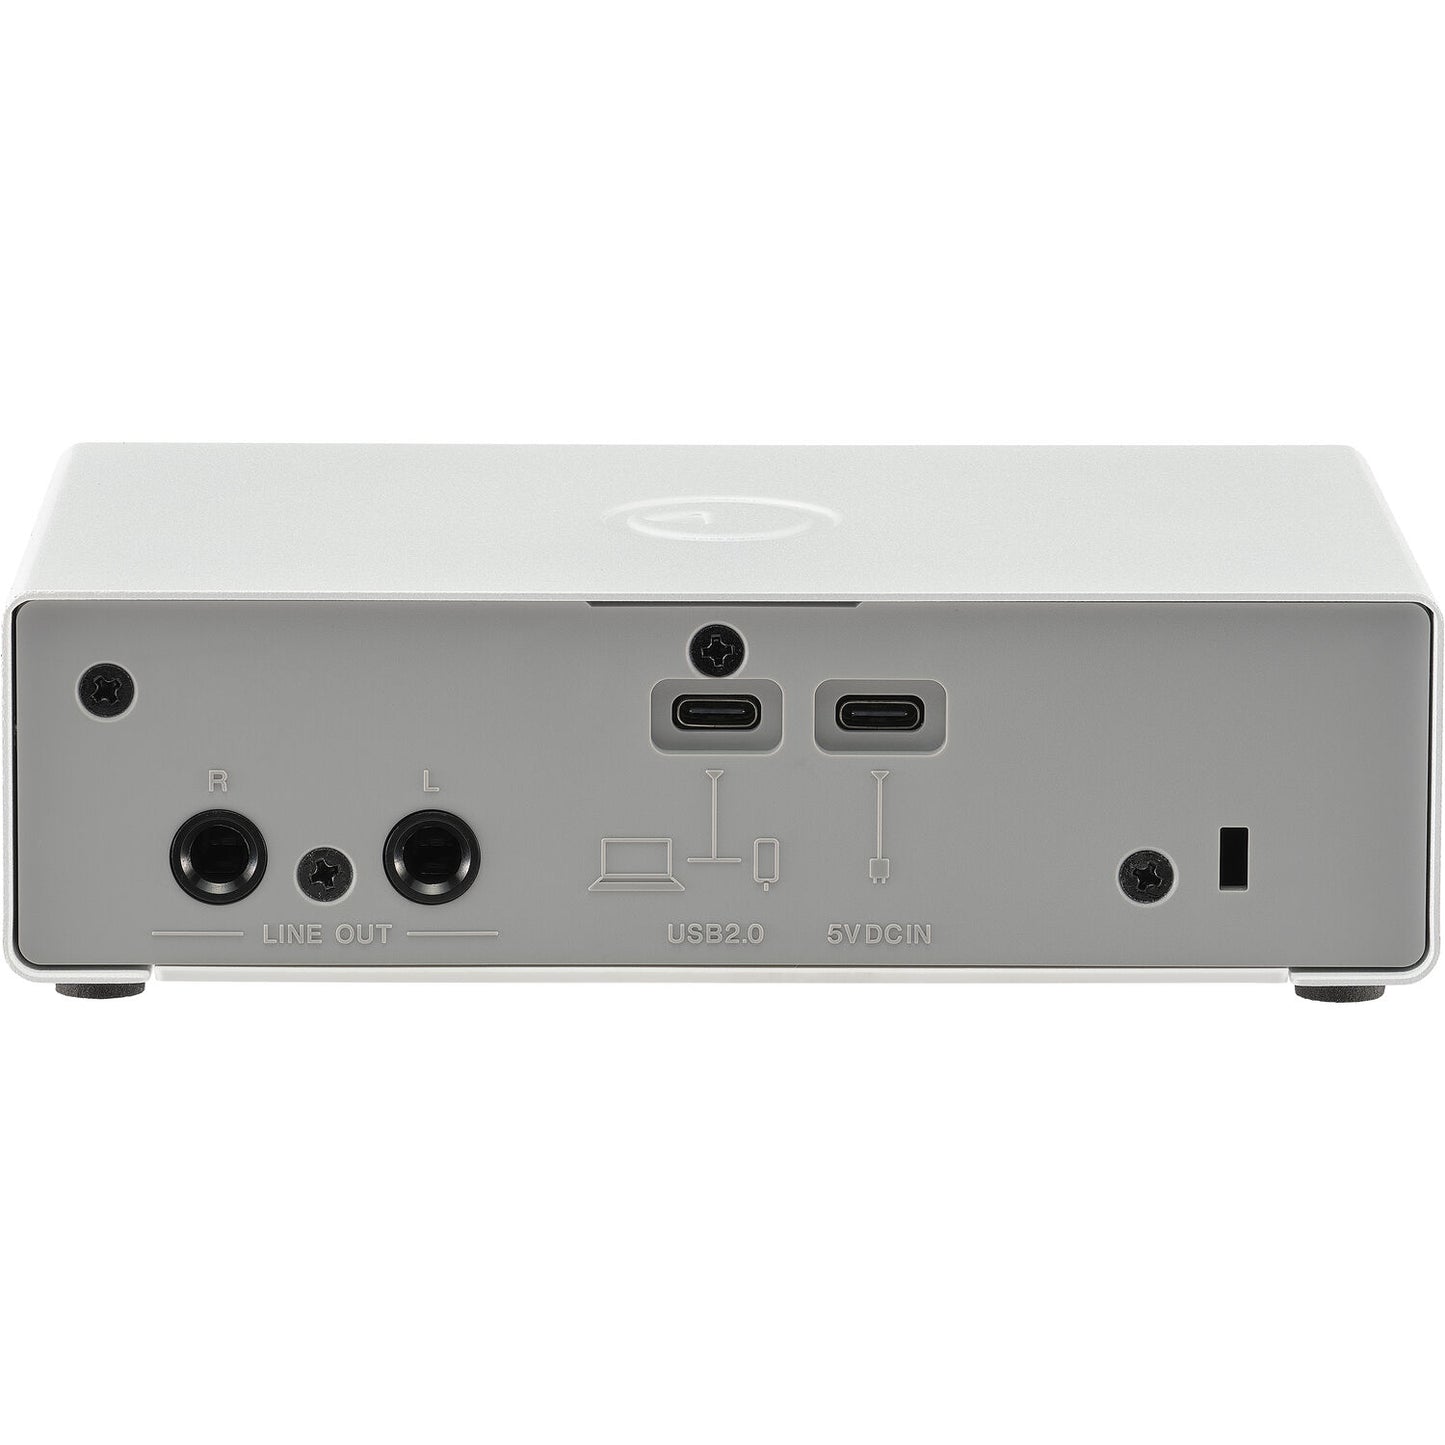 Steinberg IXO12 W White - 2IN/2OUT USB2.0 Type C Audio Interface with One Preamp